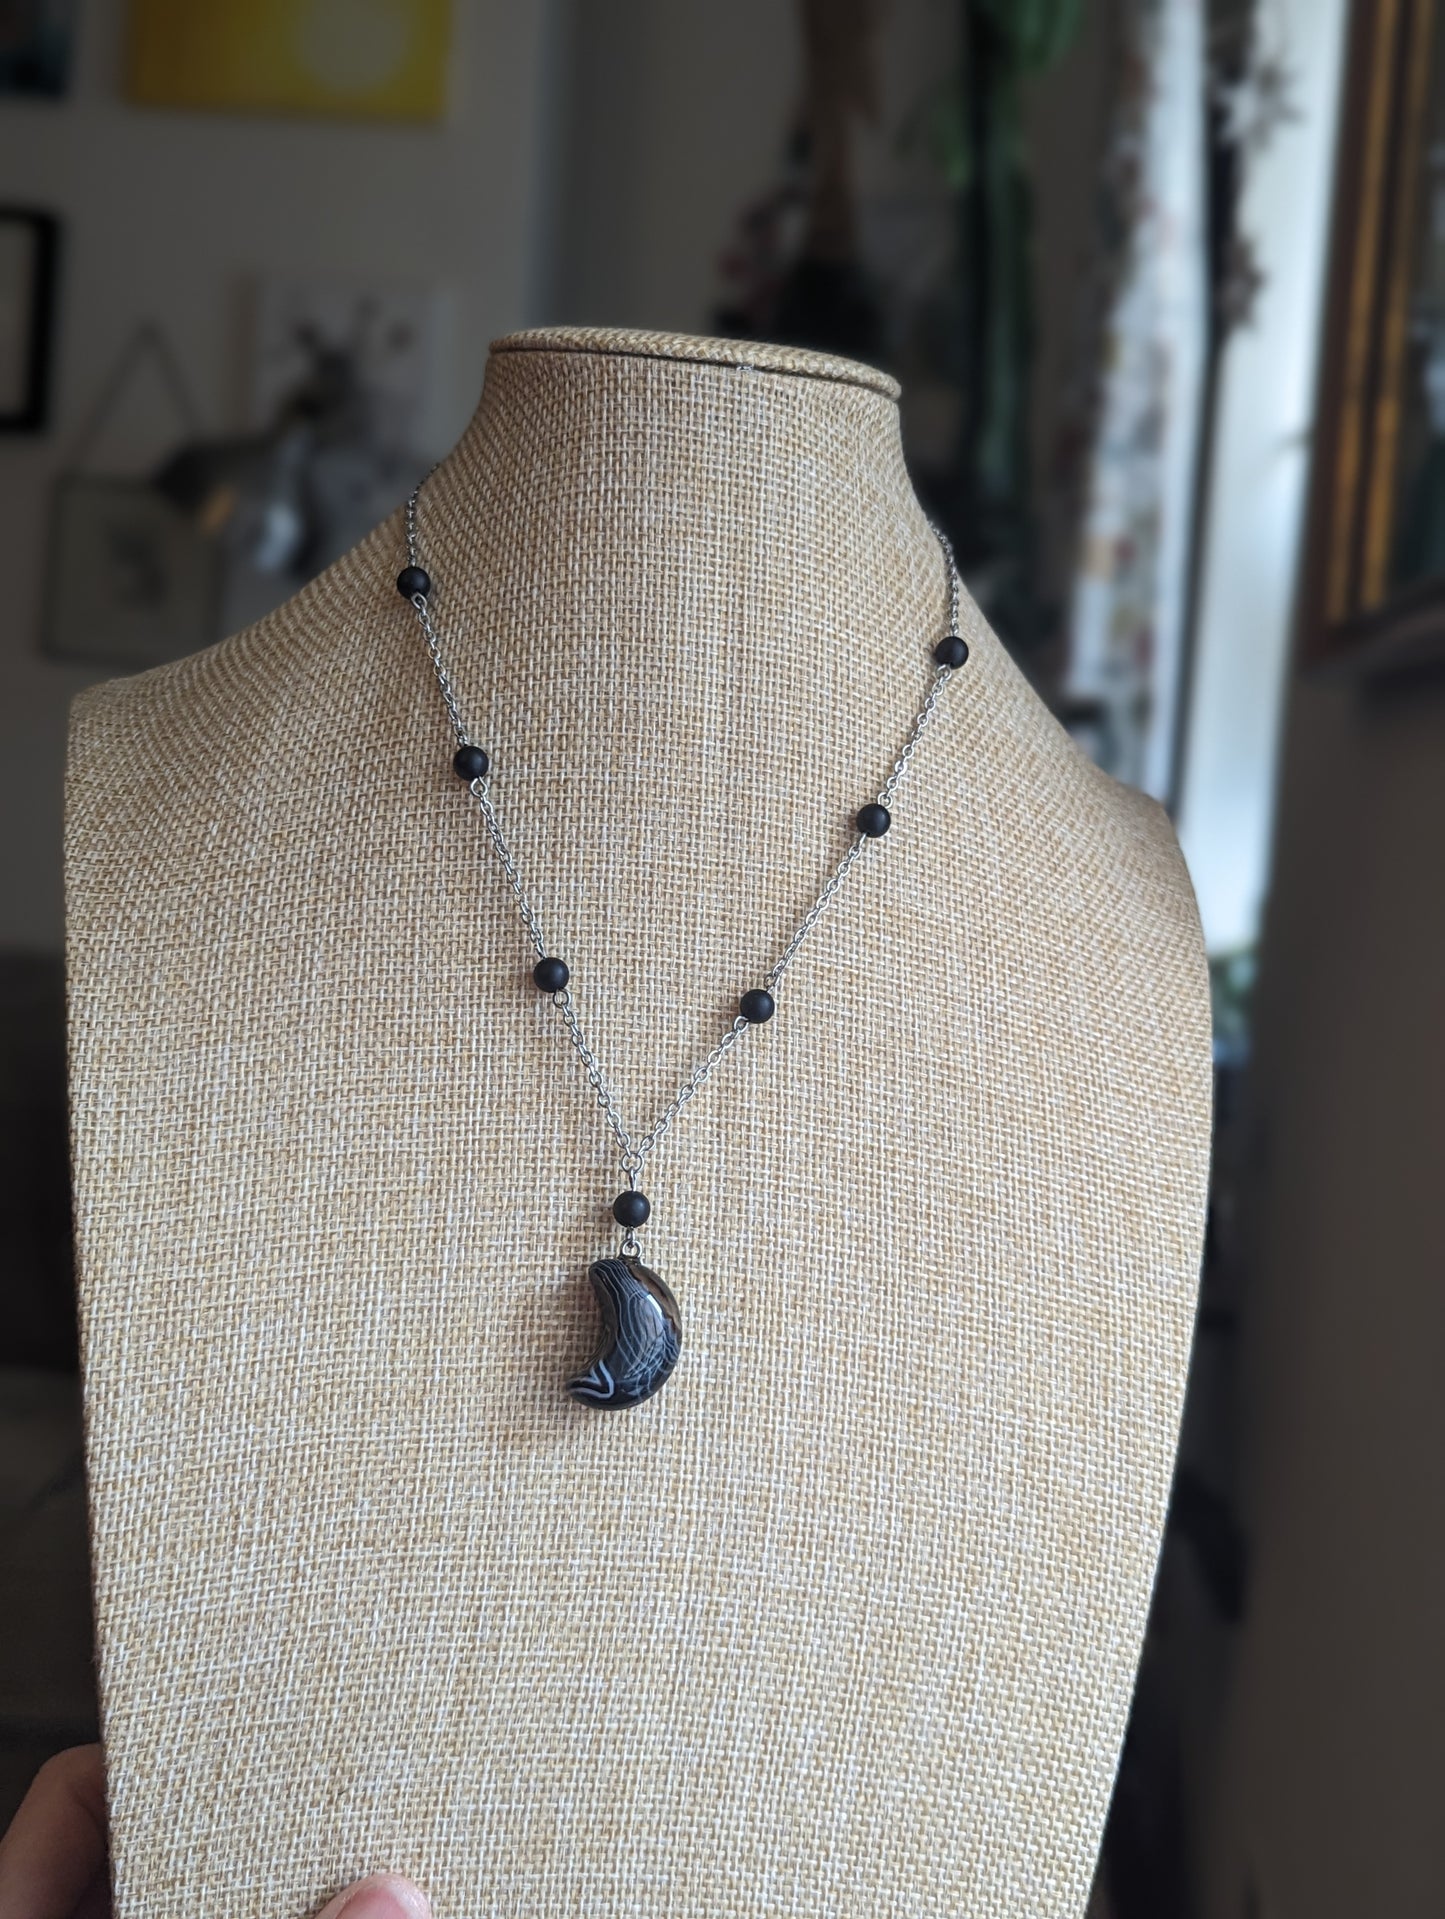 Black Agate Crescent Moon and Onyx on Stainless Necklace